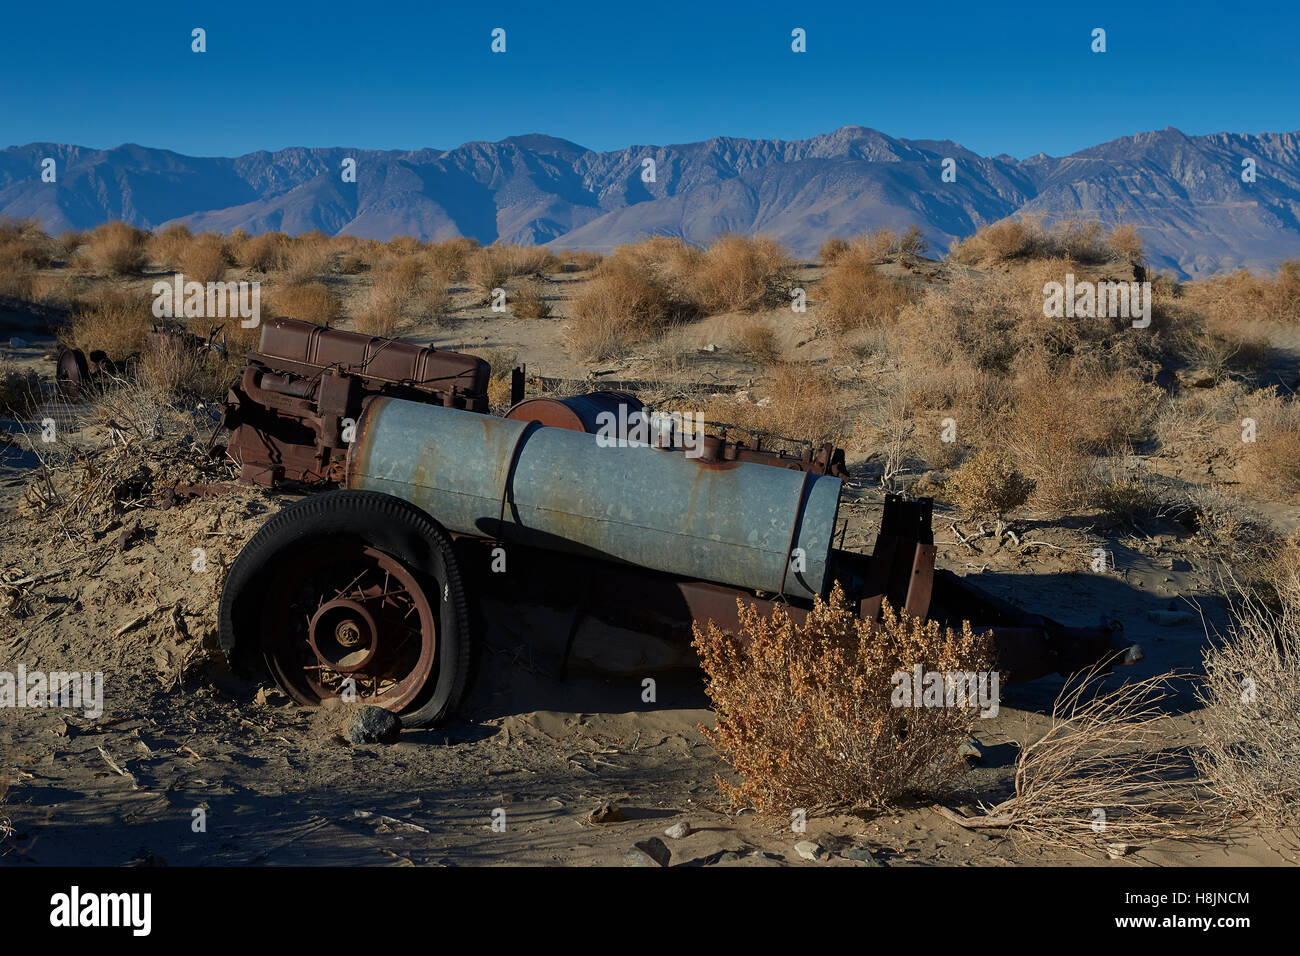 Abandoned Mining Equipment In The Owens Valley With The Sierra Nevada Mountain Range Behind. Stock Photo